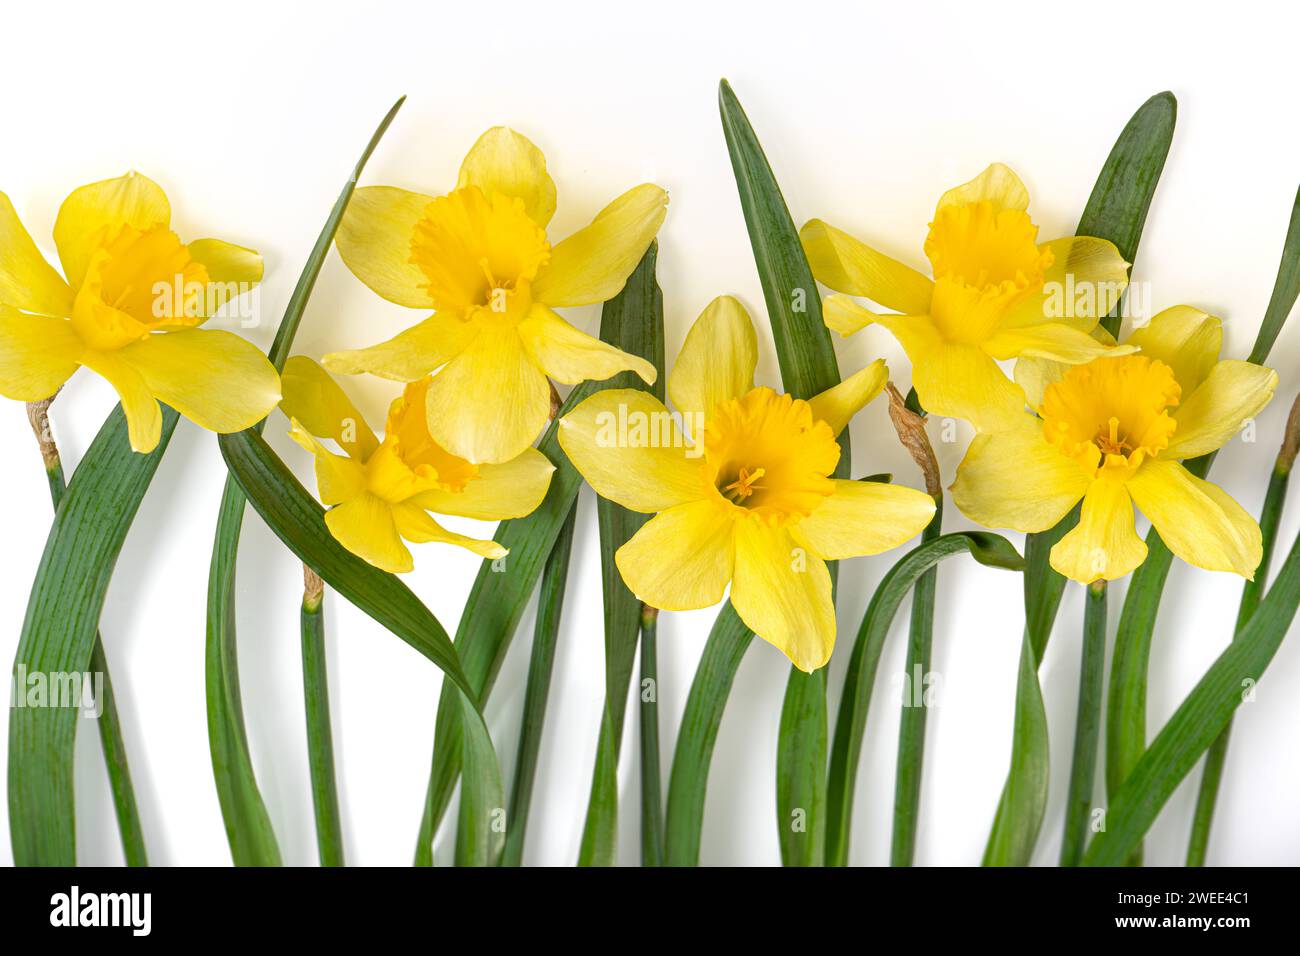 Beautiful yellow daffodils or narcissus isolated on white background. Blooming spring flowers, Easter bells. Spring greeting card, invitation card for Stock Photo